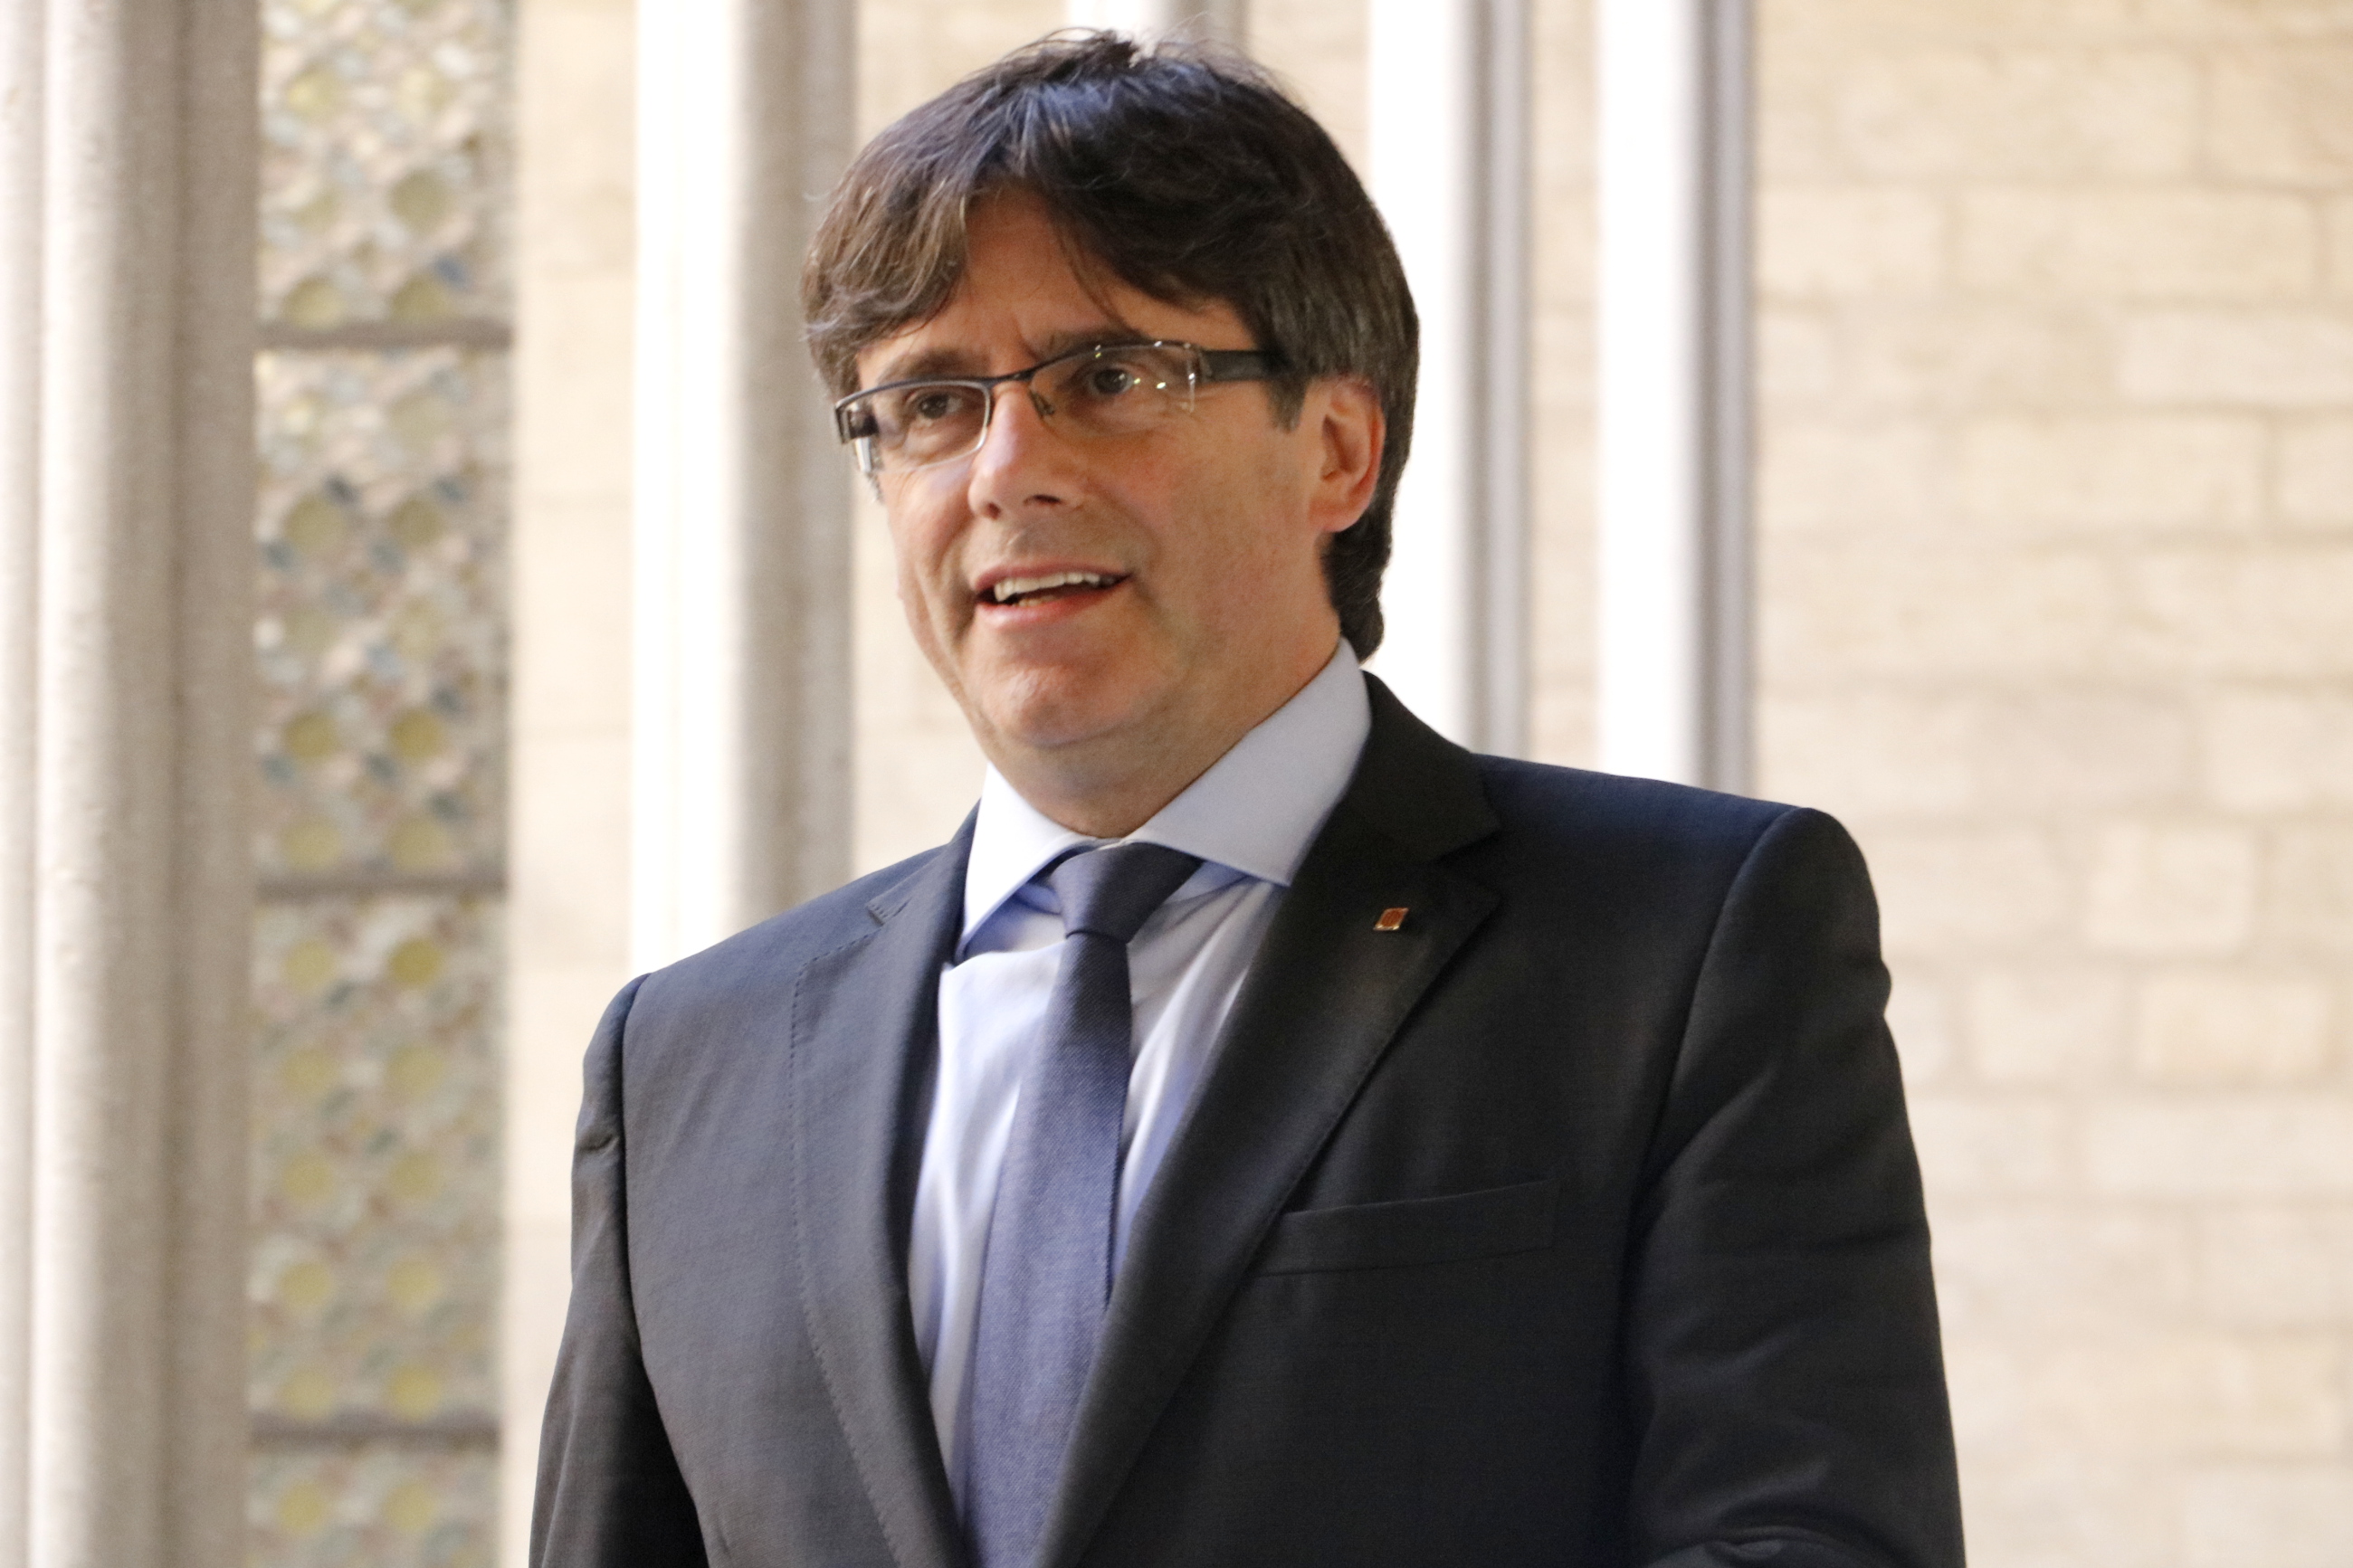 The Catalan President, Carles Puigdemont (by ACN)